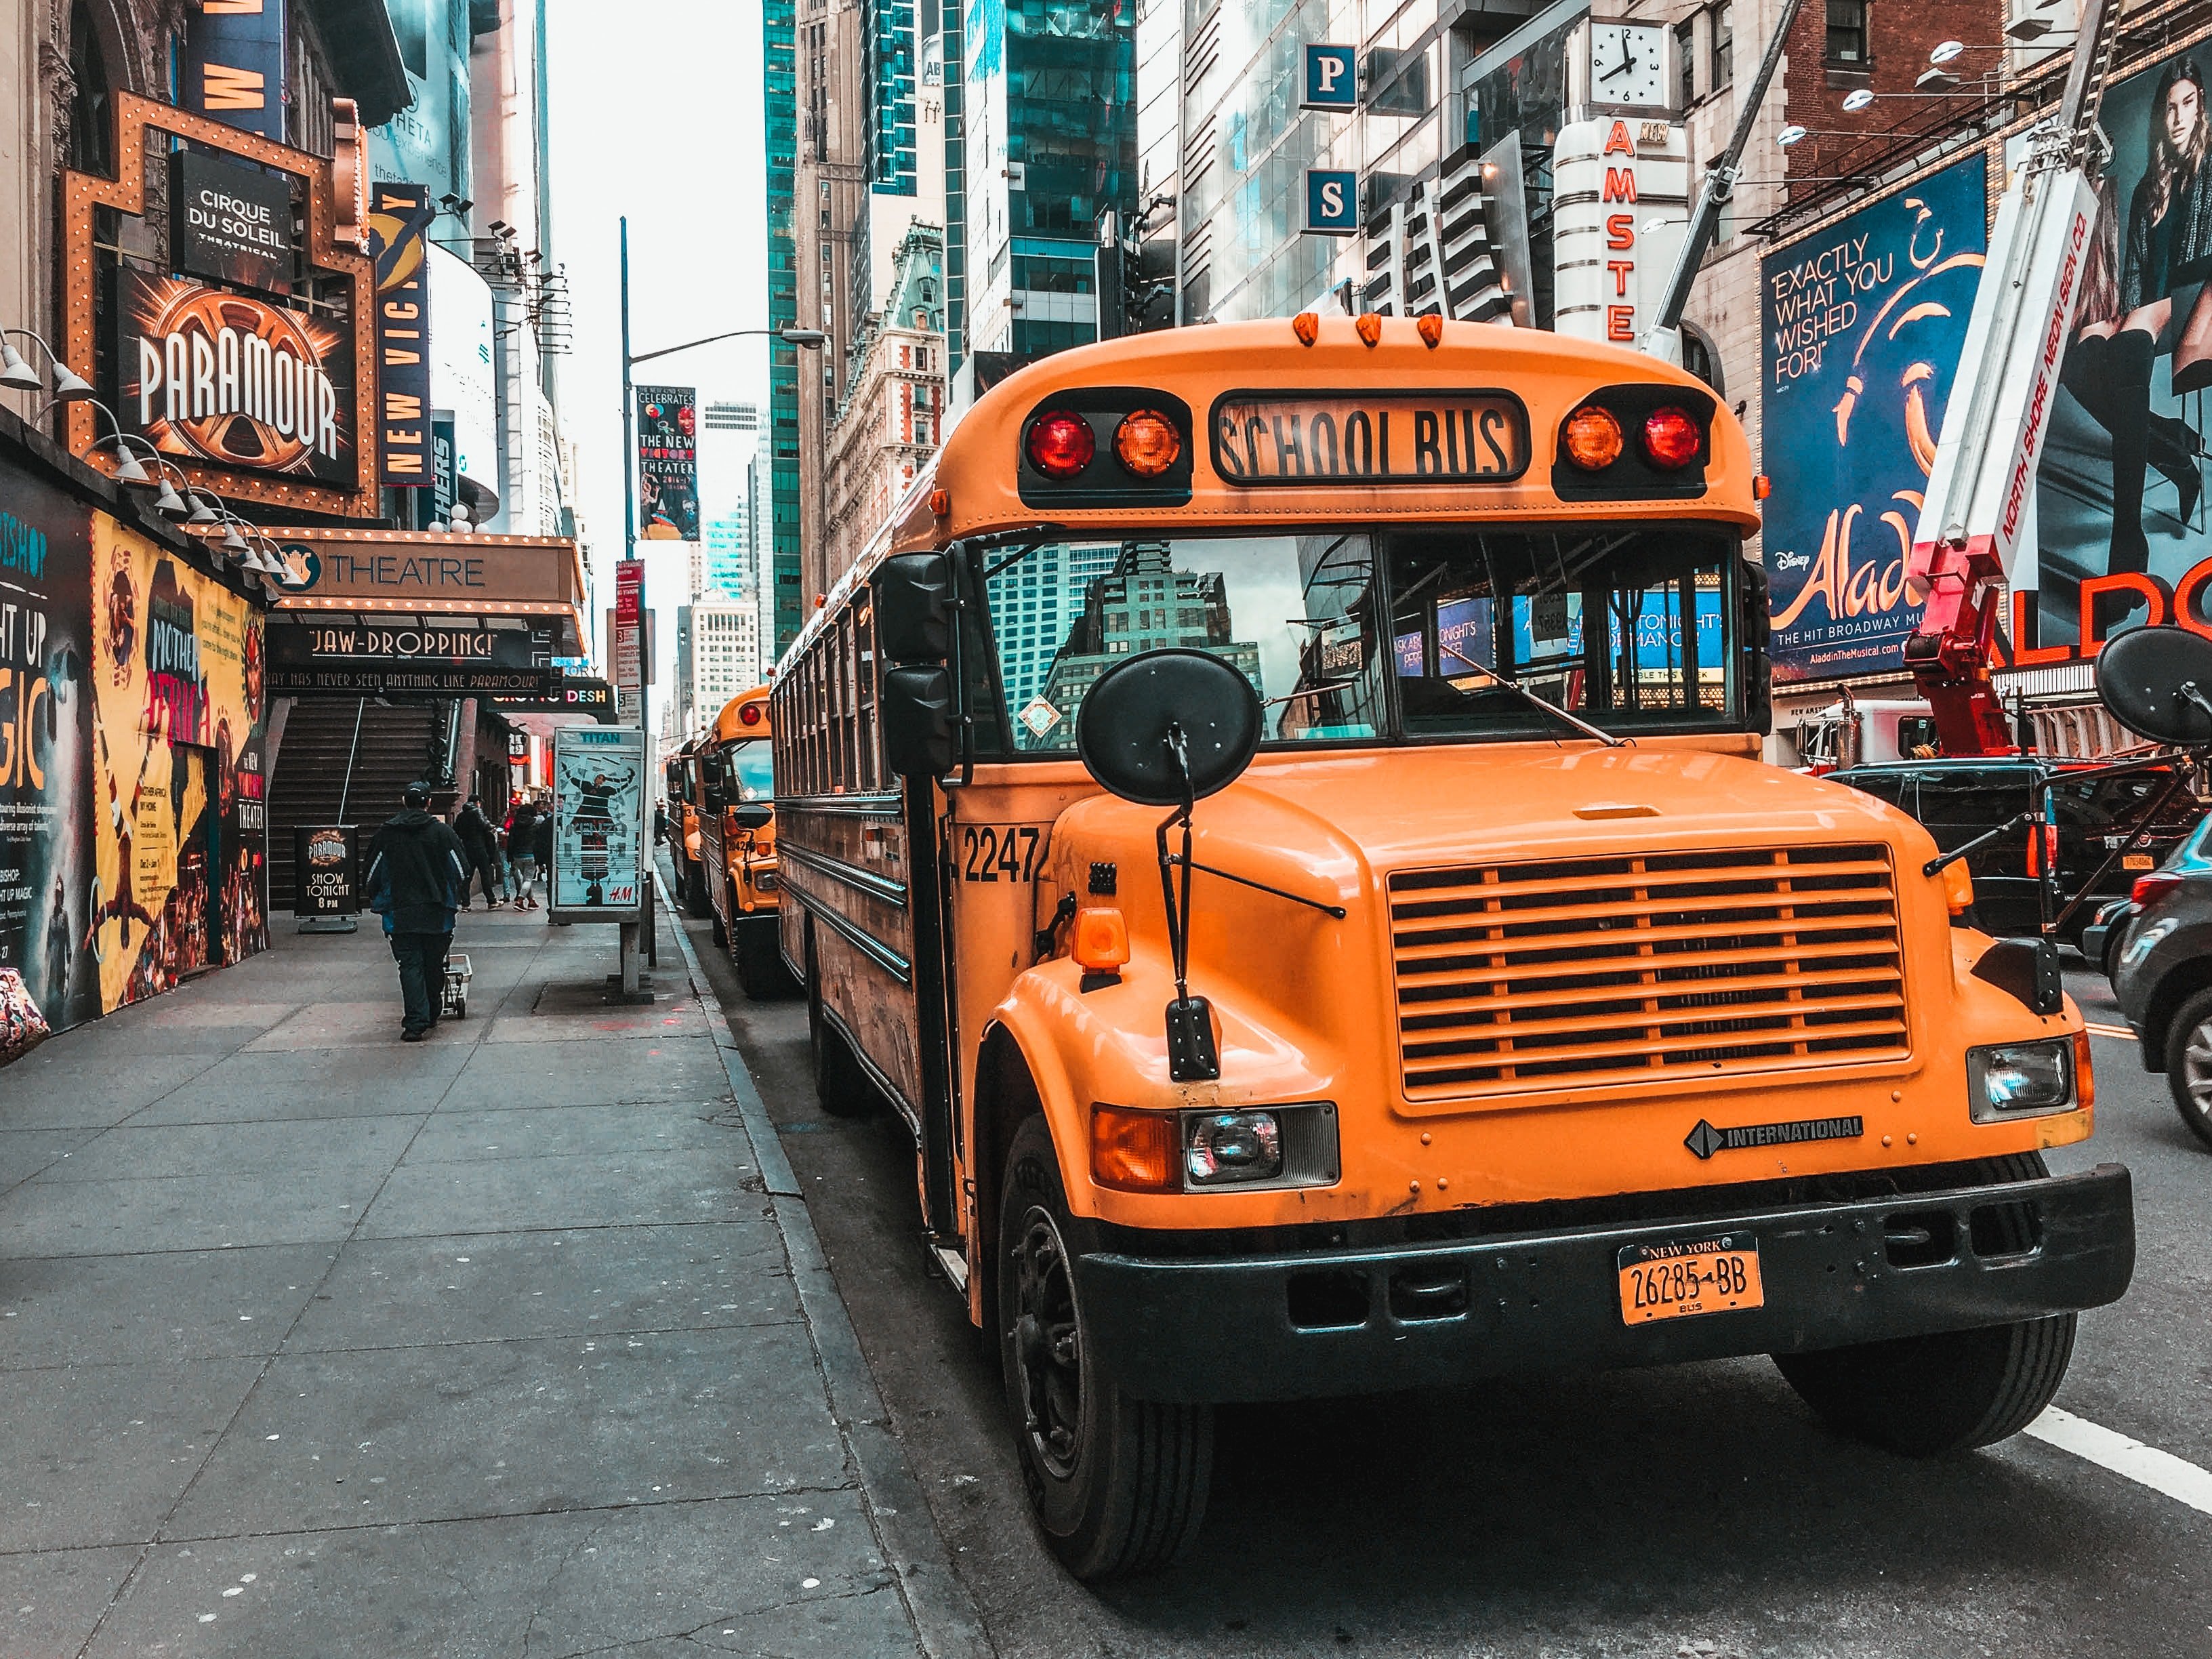 Todd walked over to his school bus & was nervous about being watched. | Source: Unsplash